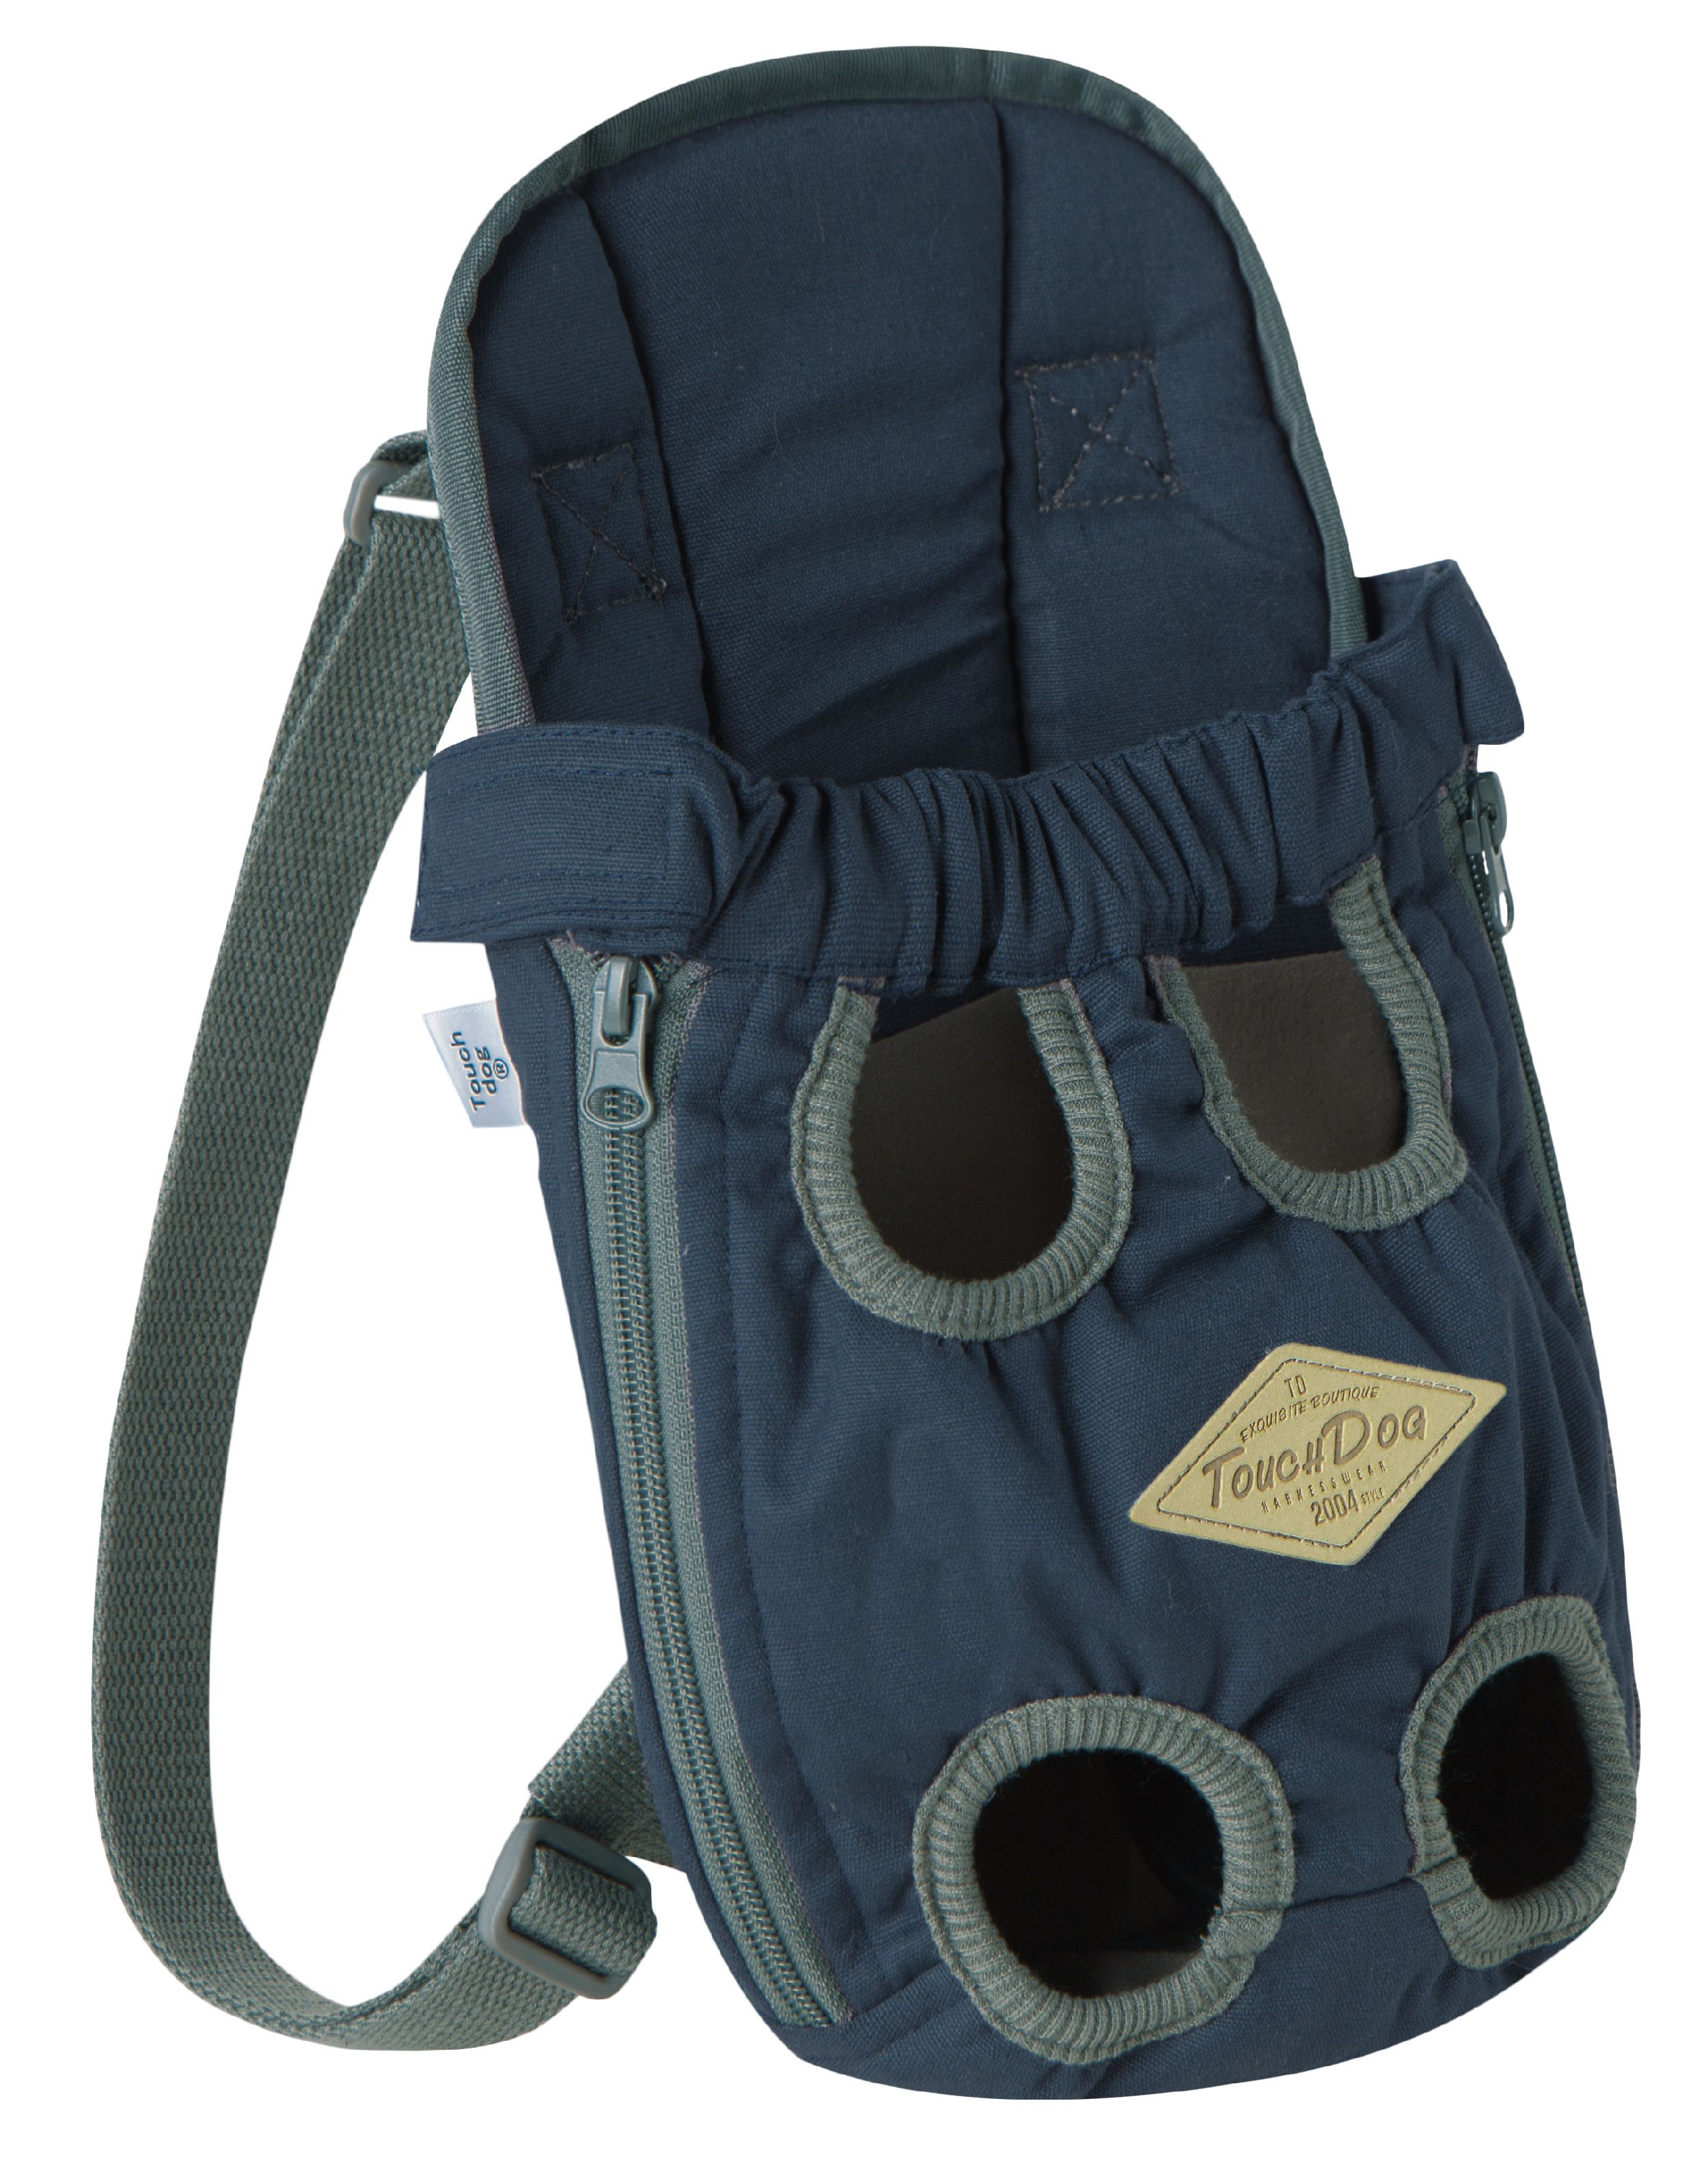 Touchdog ® 'Wiggle-Sack' Fashion Designer Front and Backpack Dog Carrier Navy Small